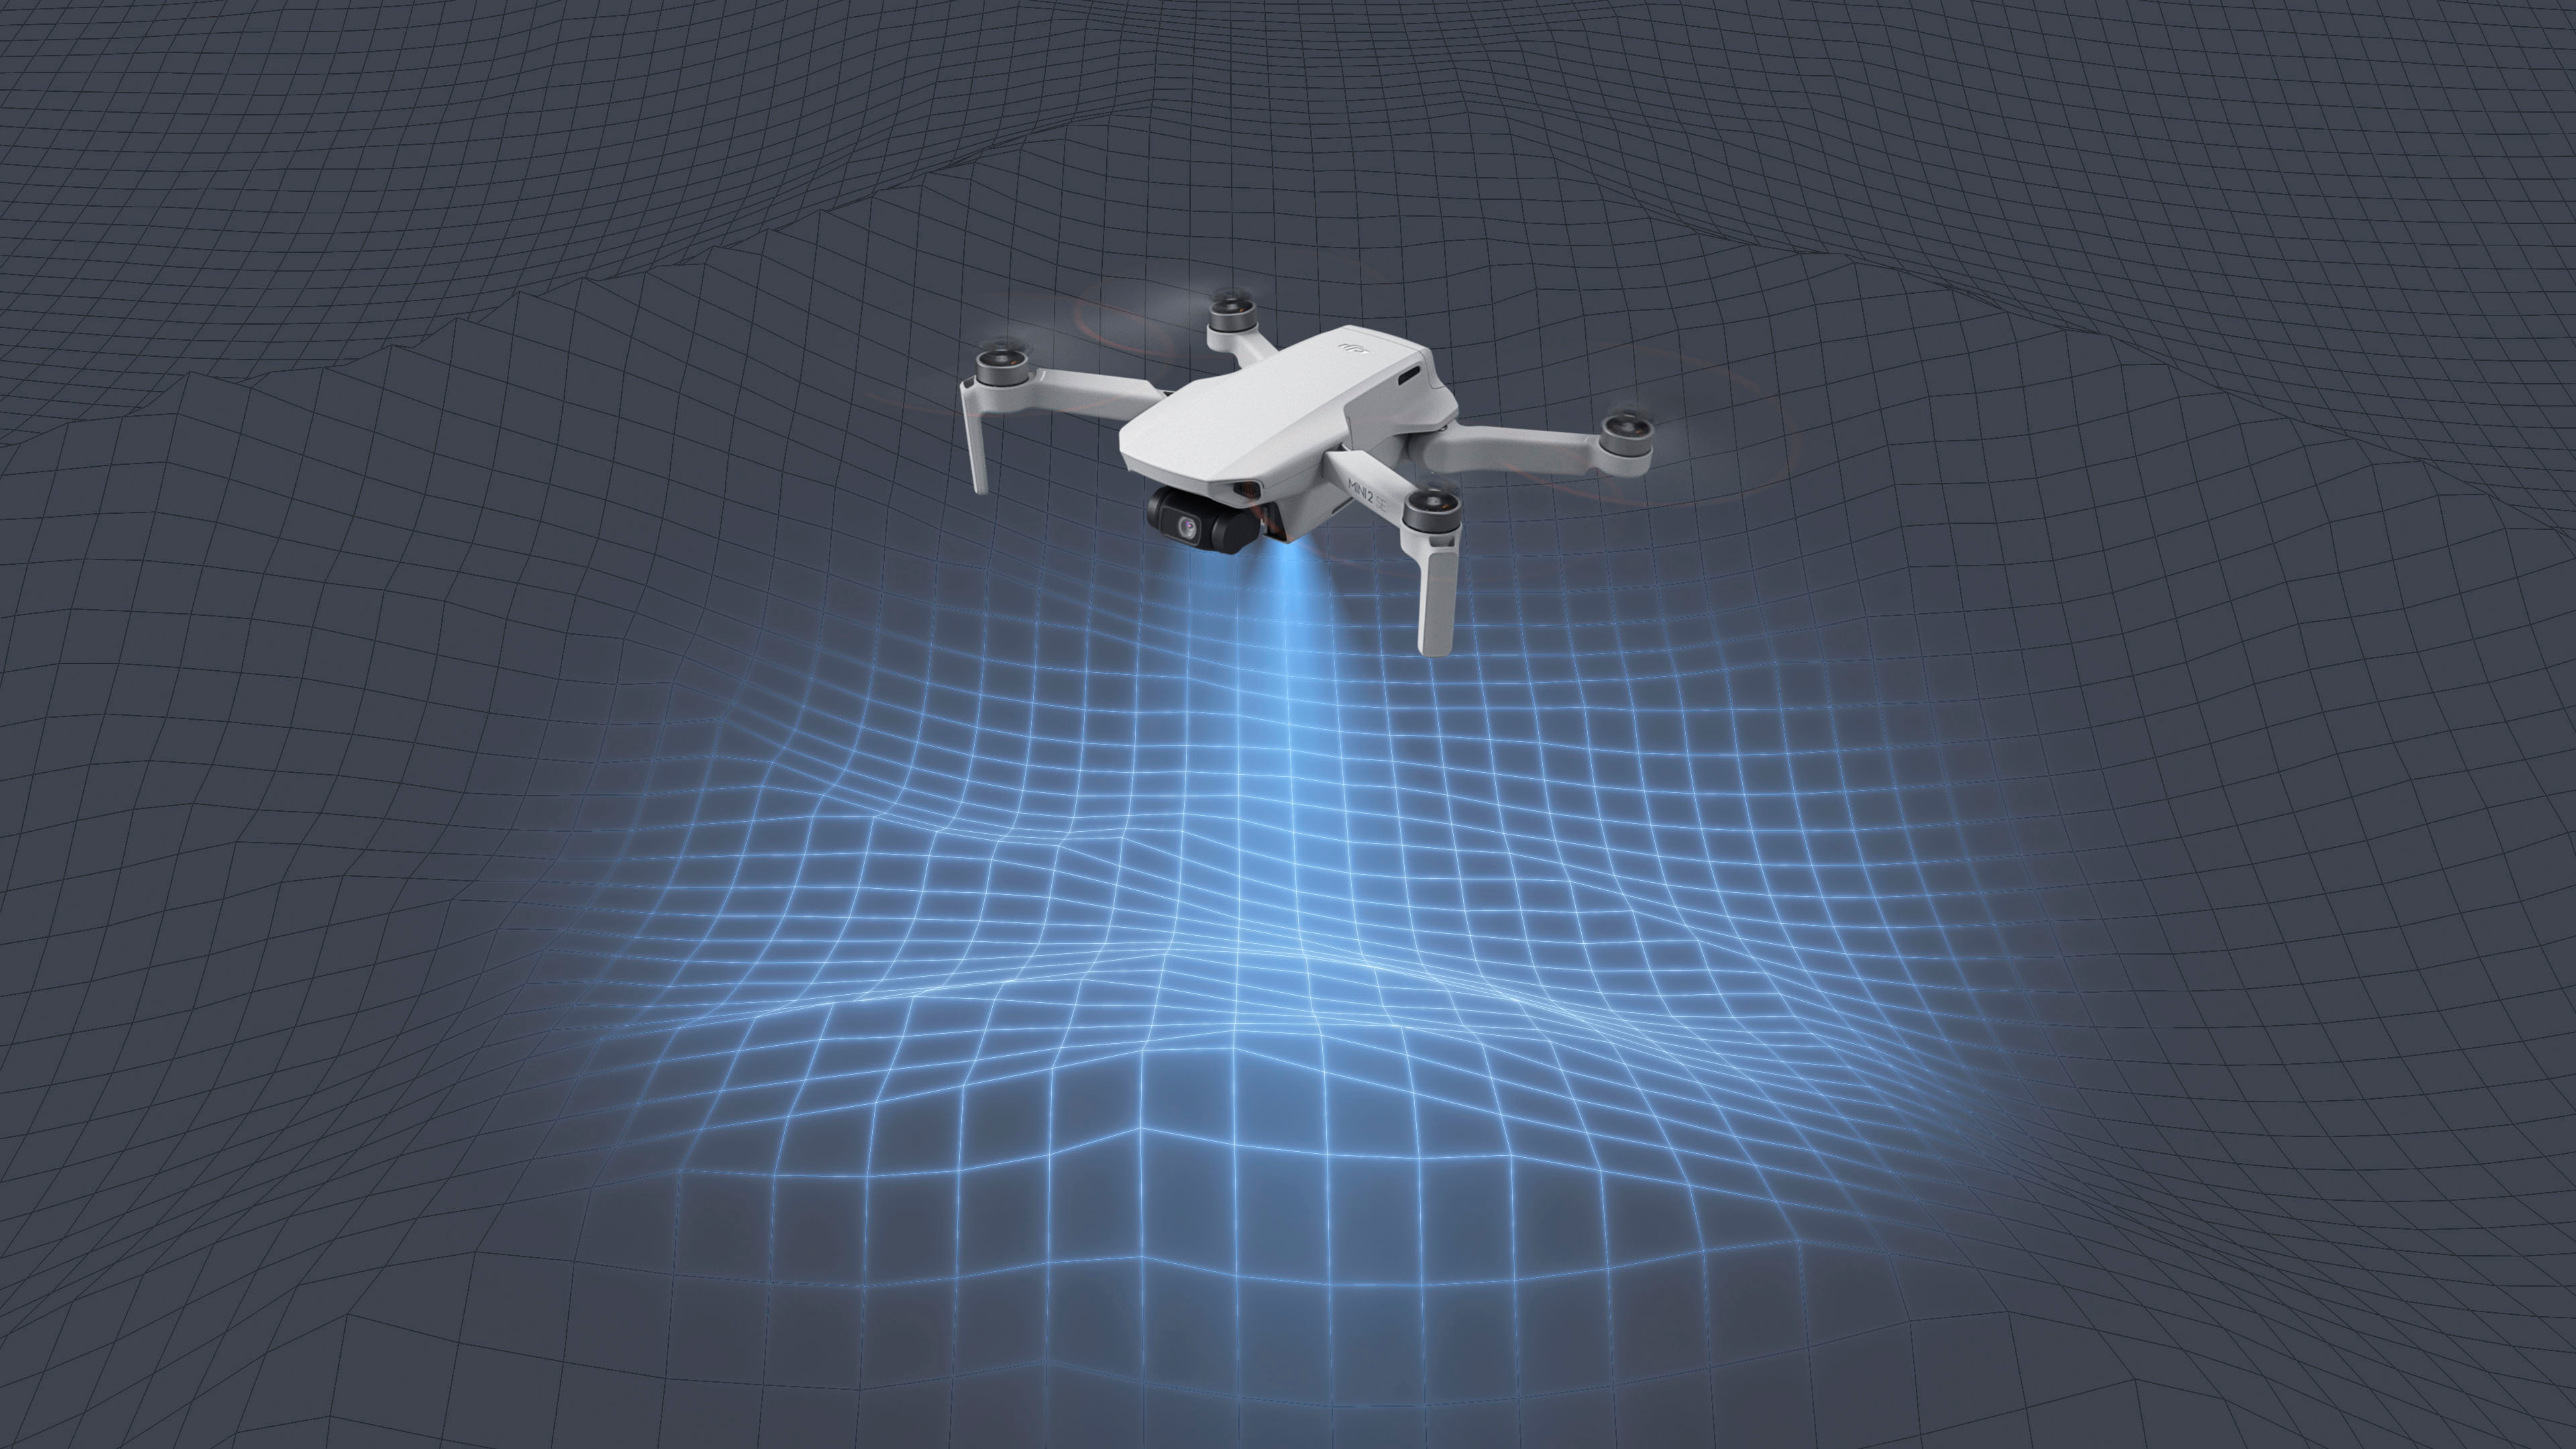 Last chance! Save $40 on the lightweight DJI Mini 2 SE drone this